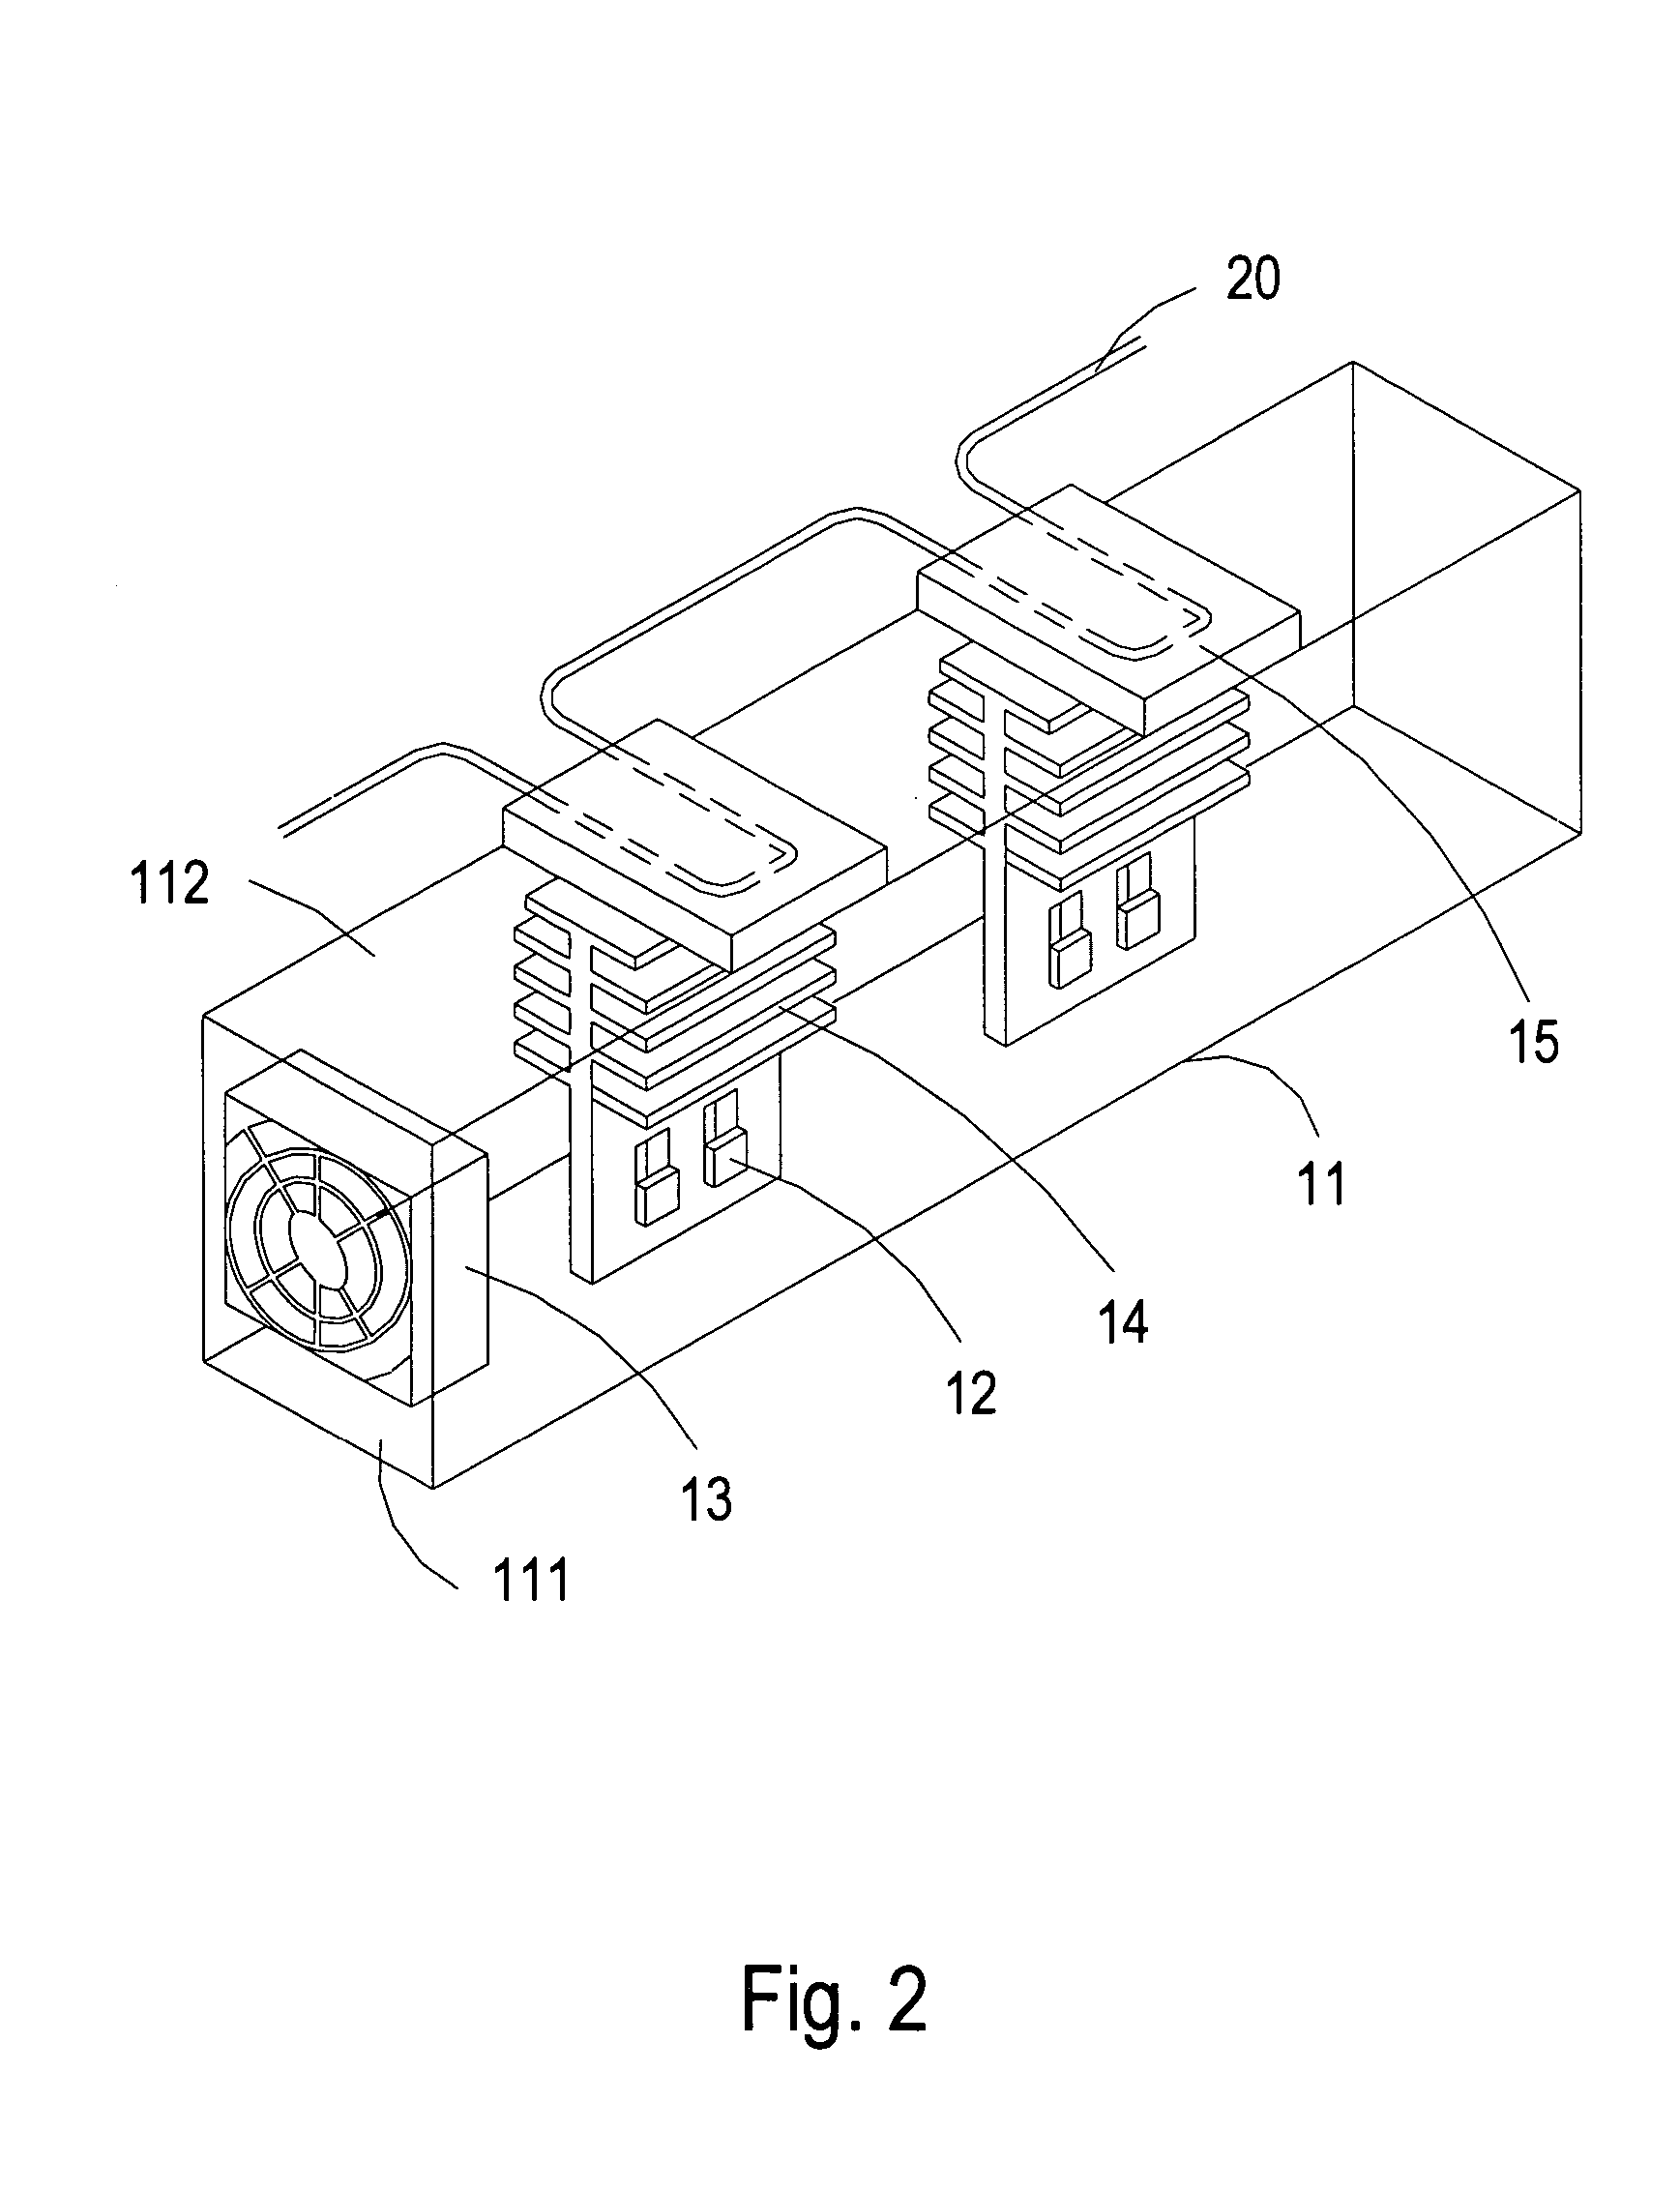 Heat-dissipating module of electronic device